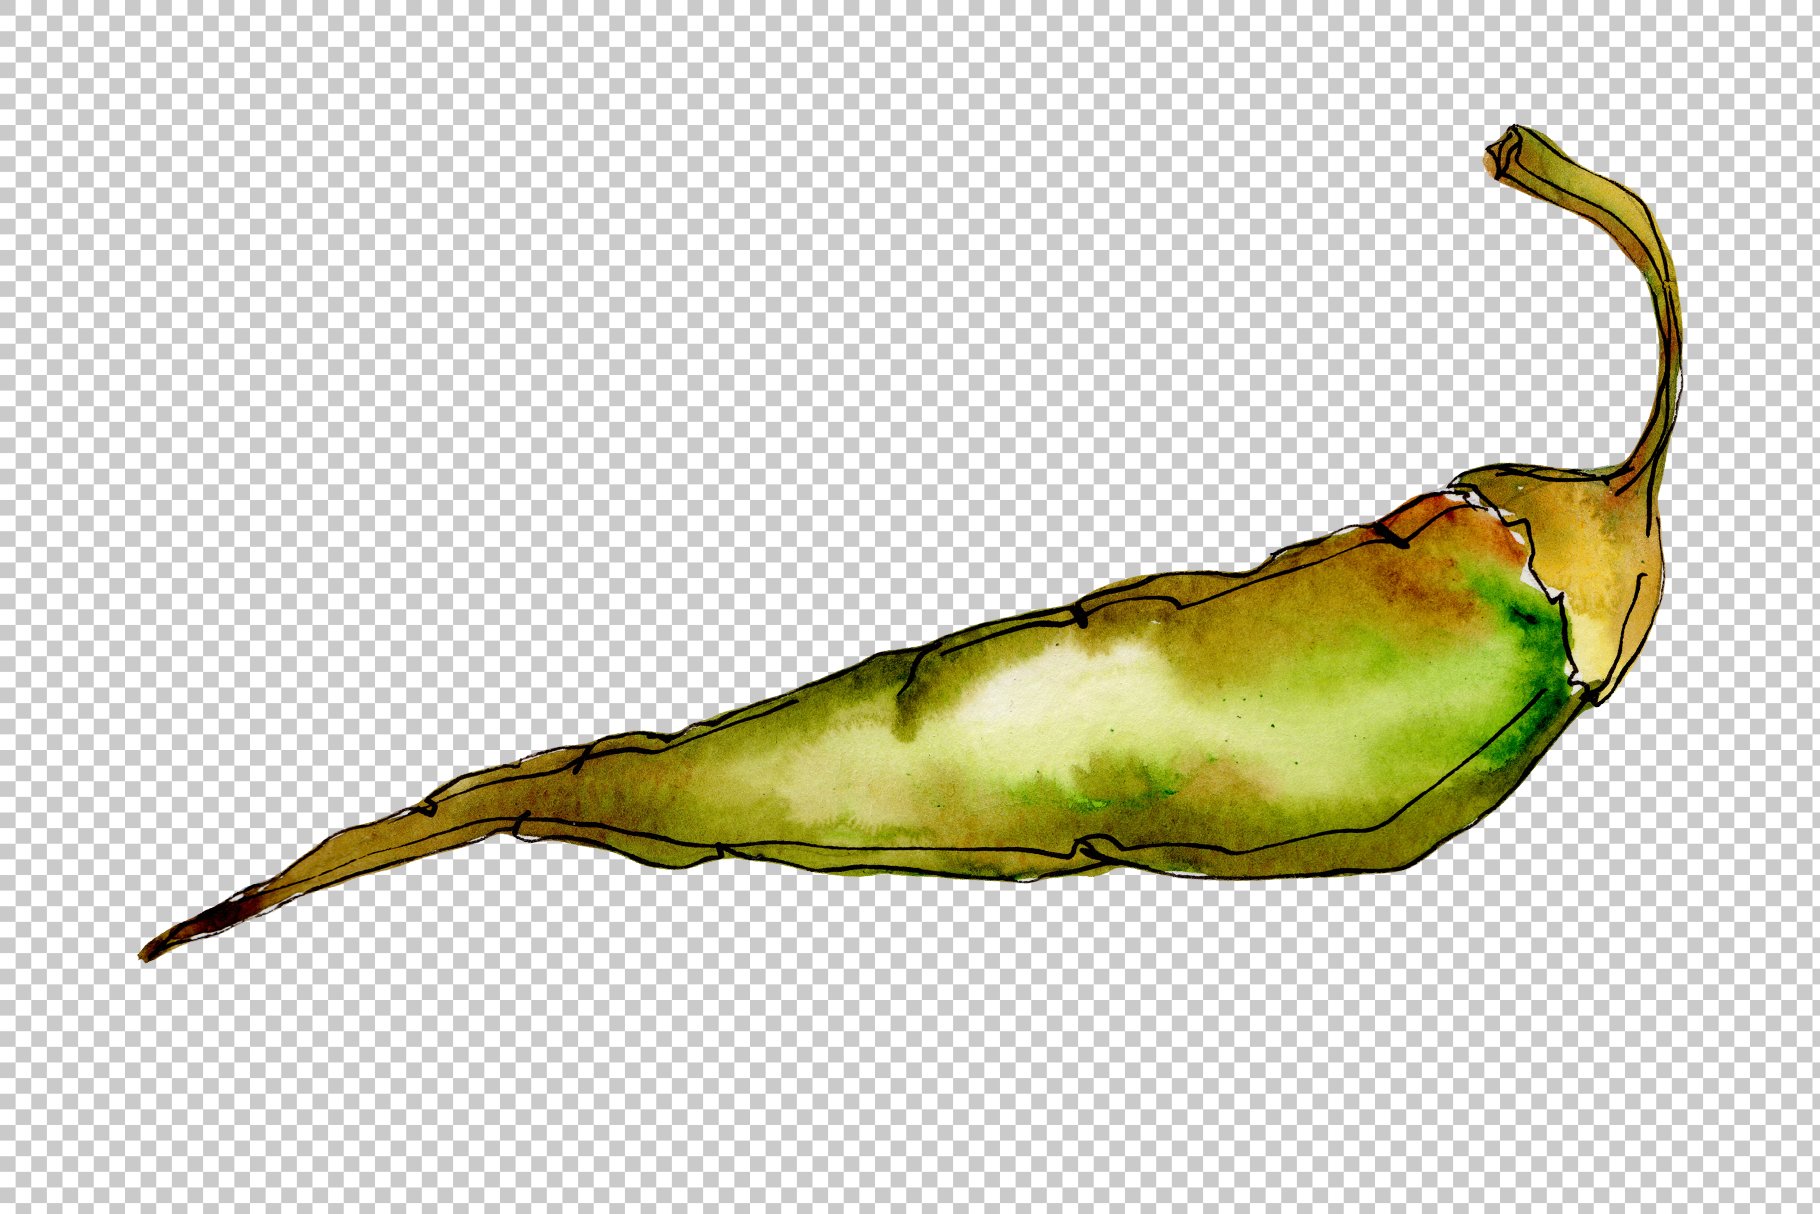 Green pepper on a transparent background.